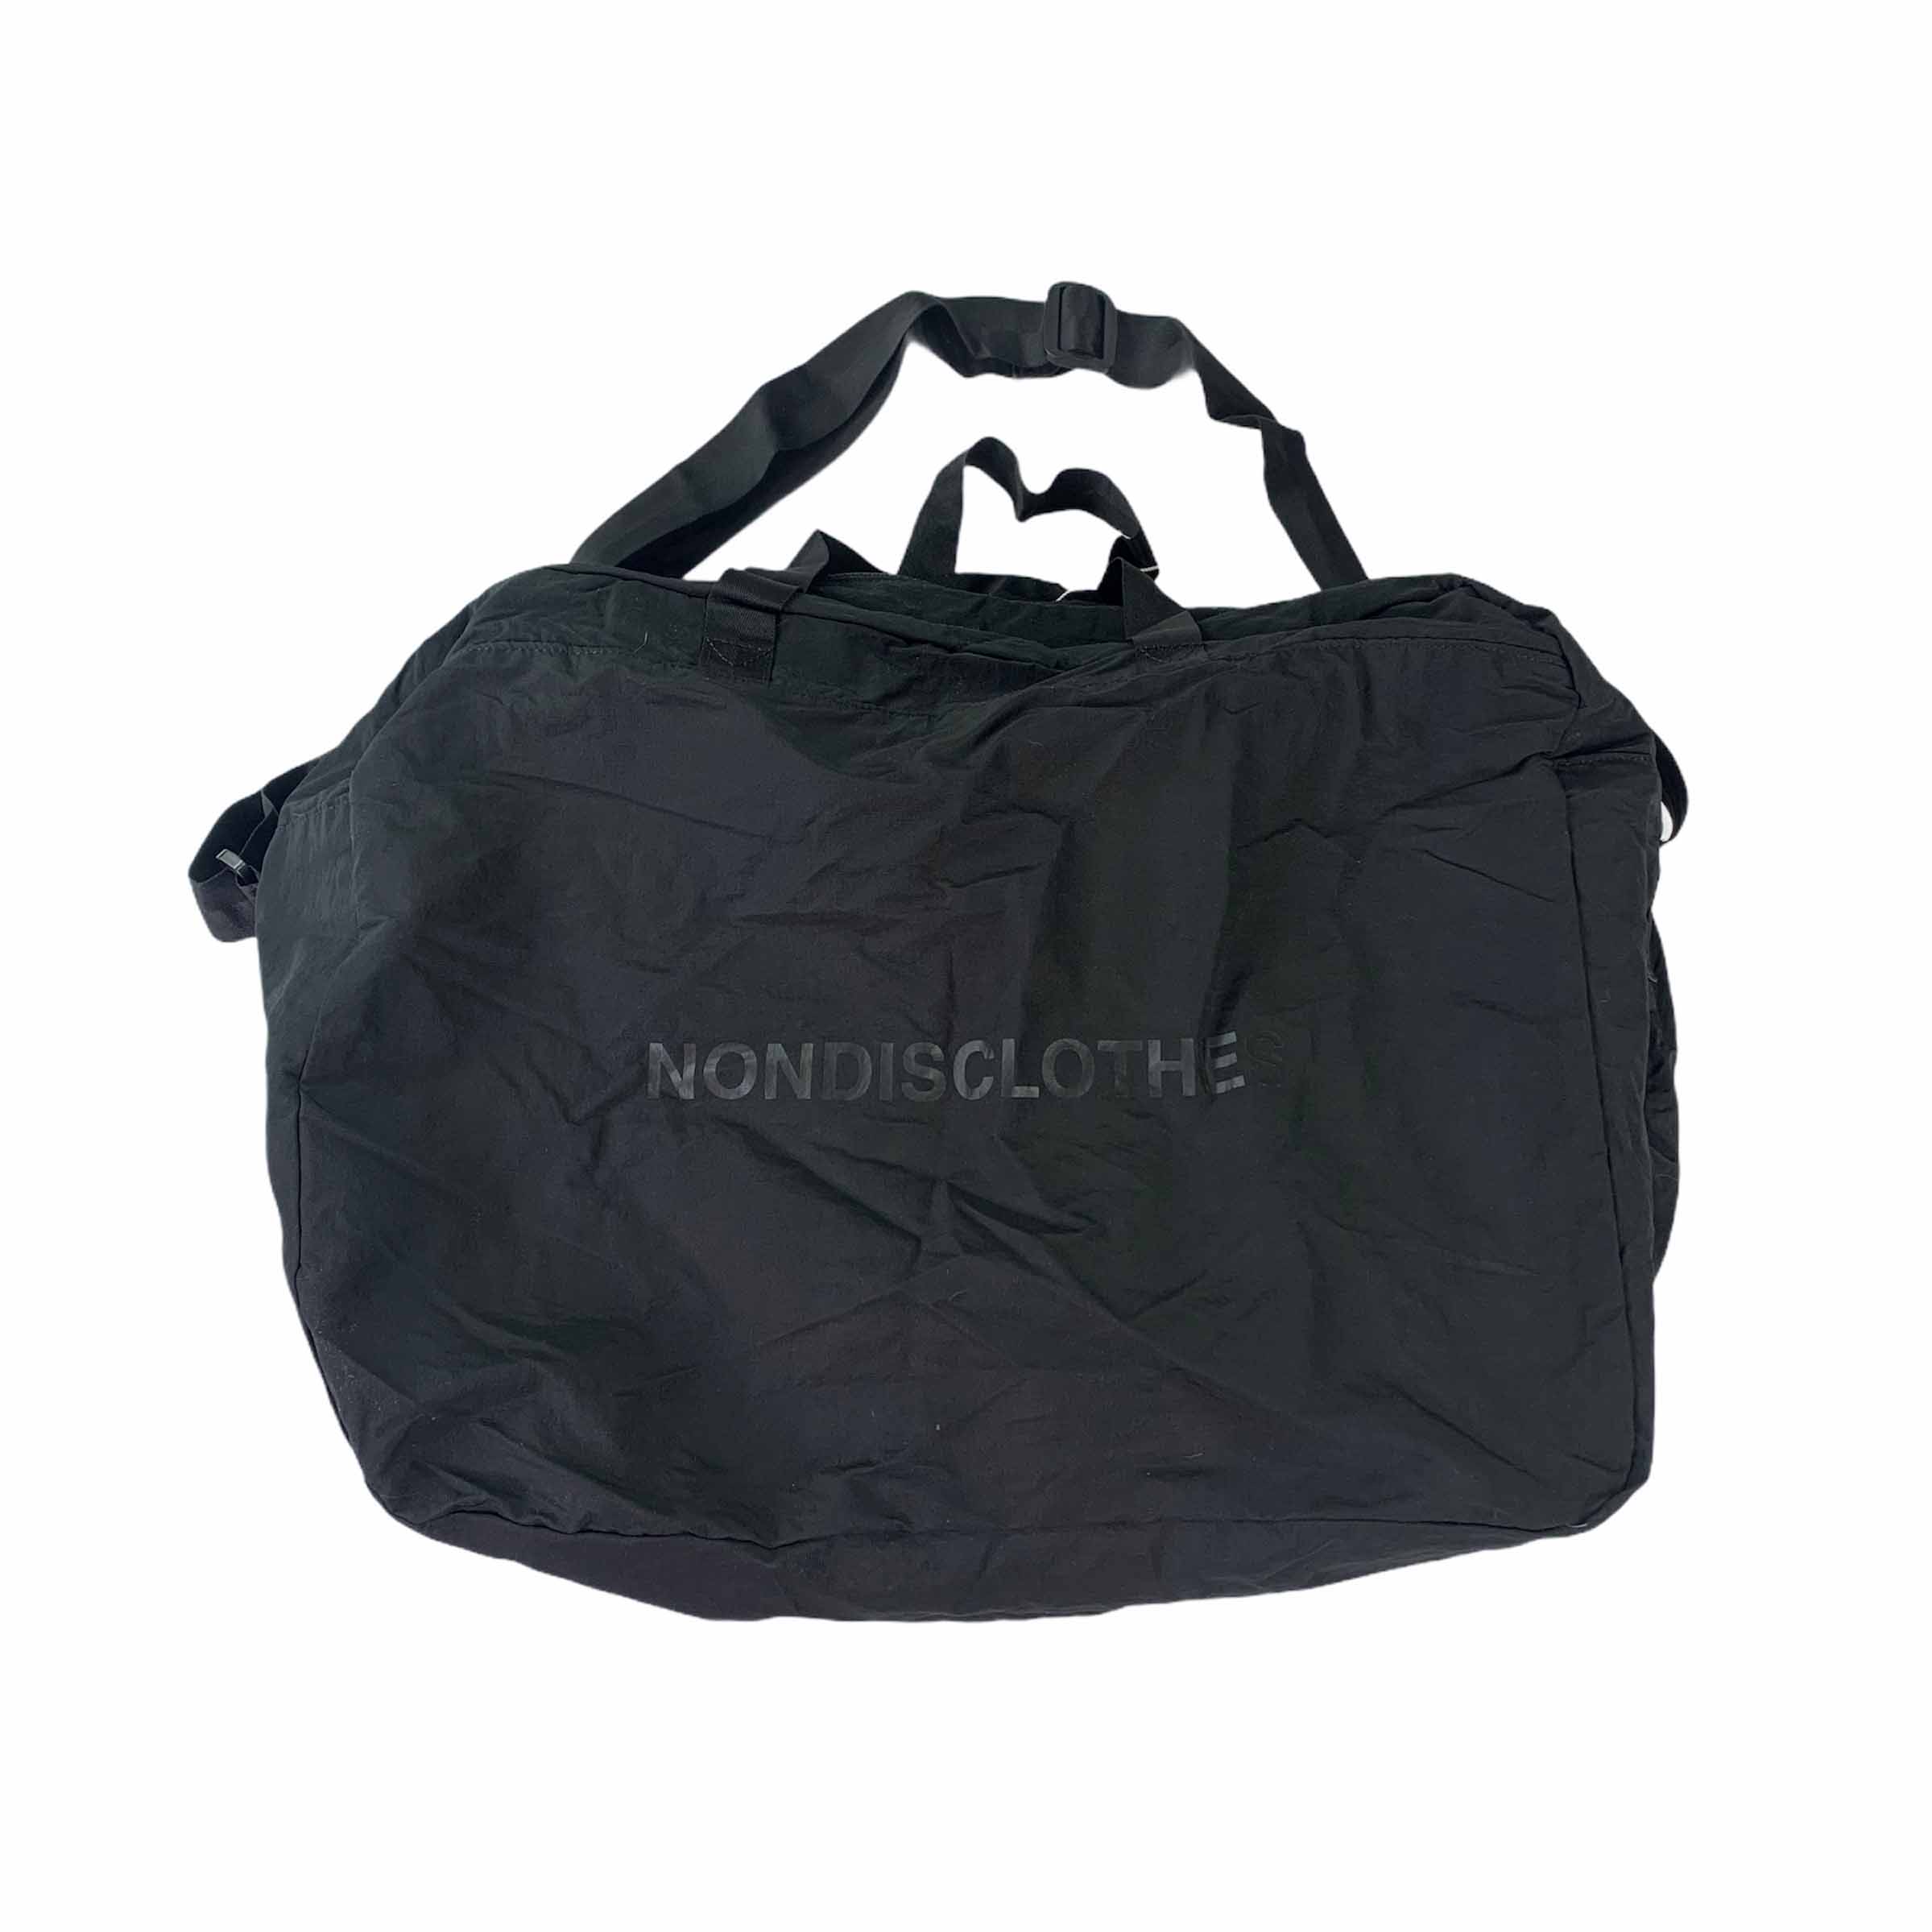 [Nondisclothes] Big Tote Bag BK - Size Free